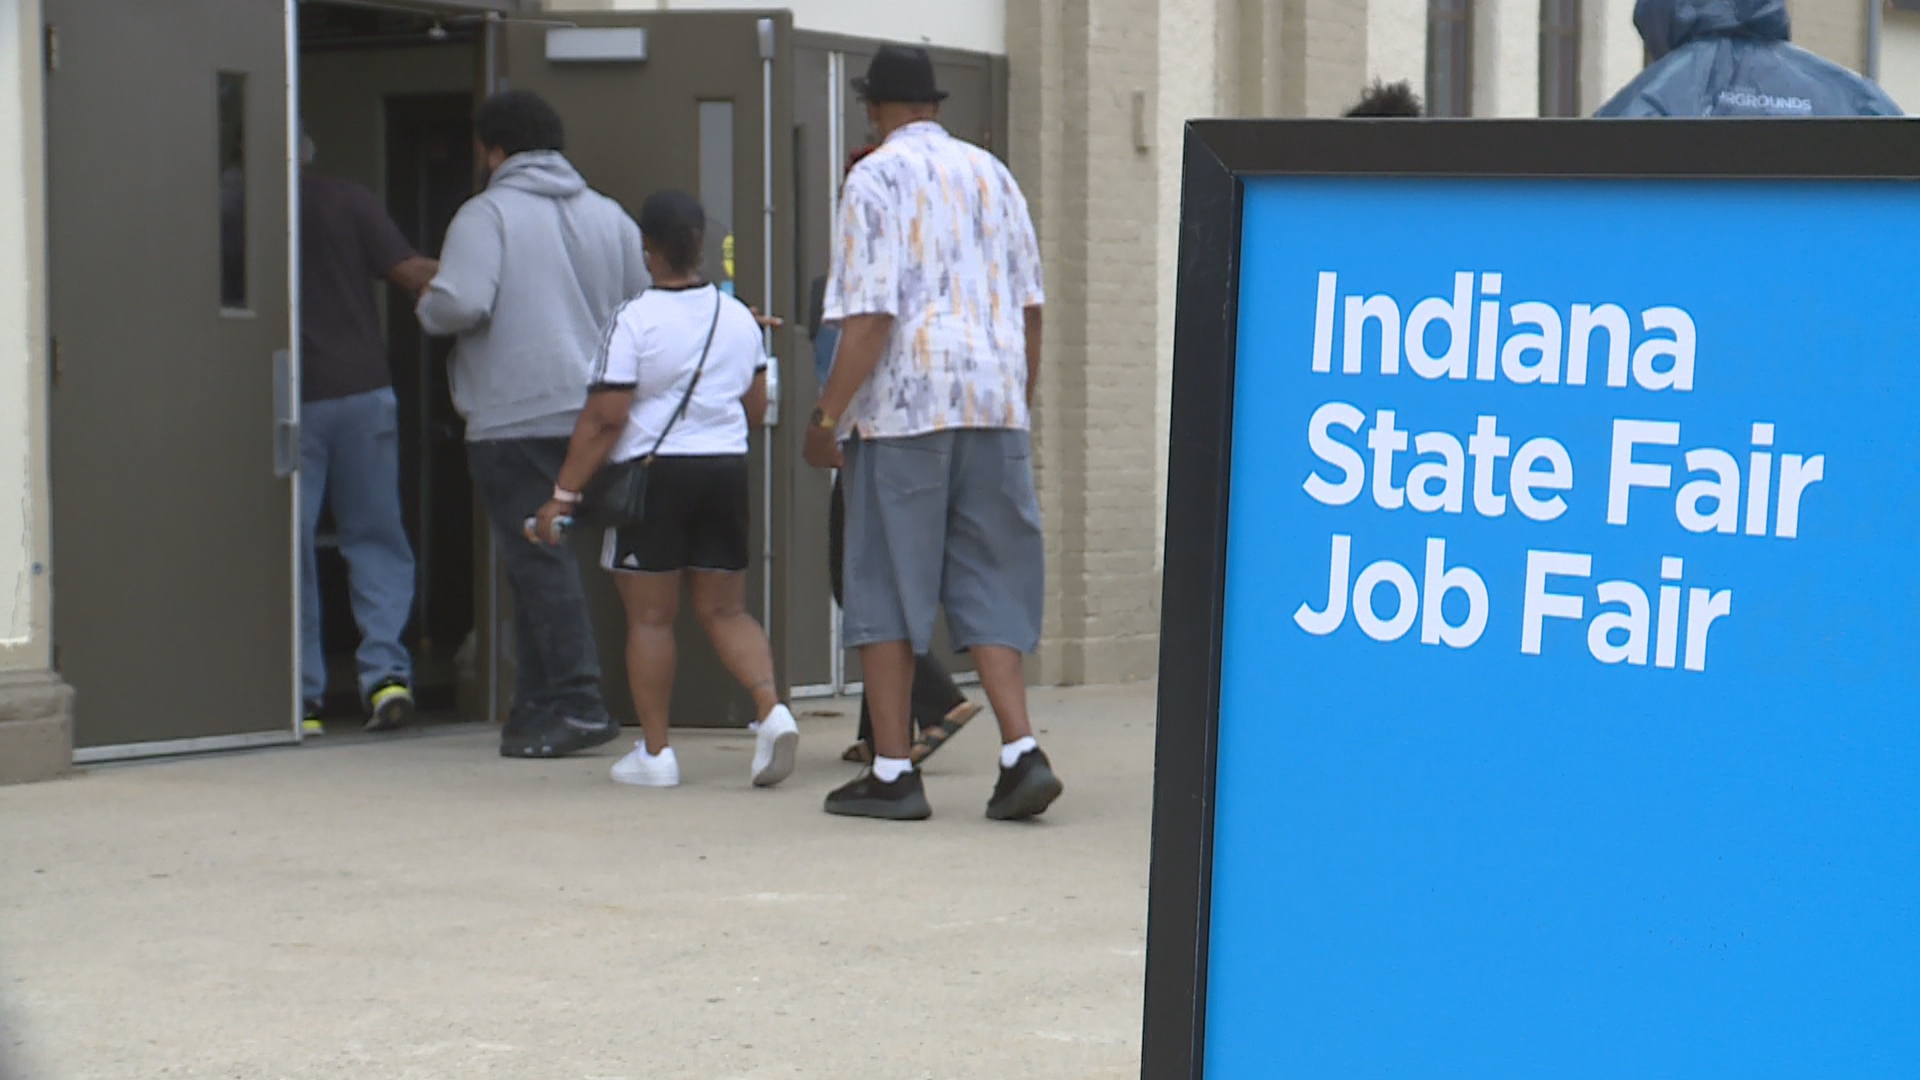 Indiana State Fair welcomes job applicants